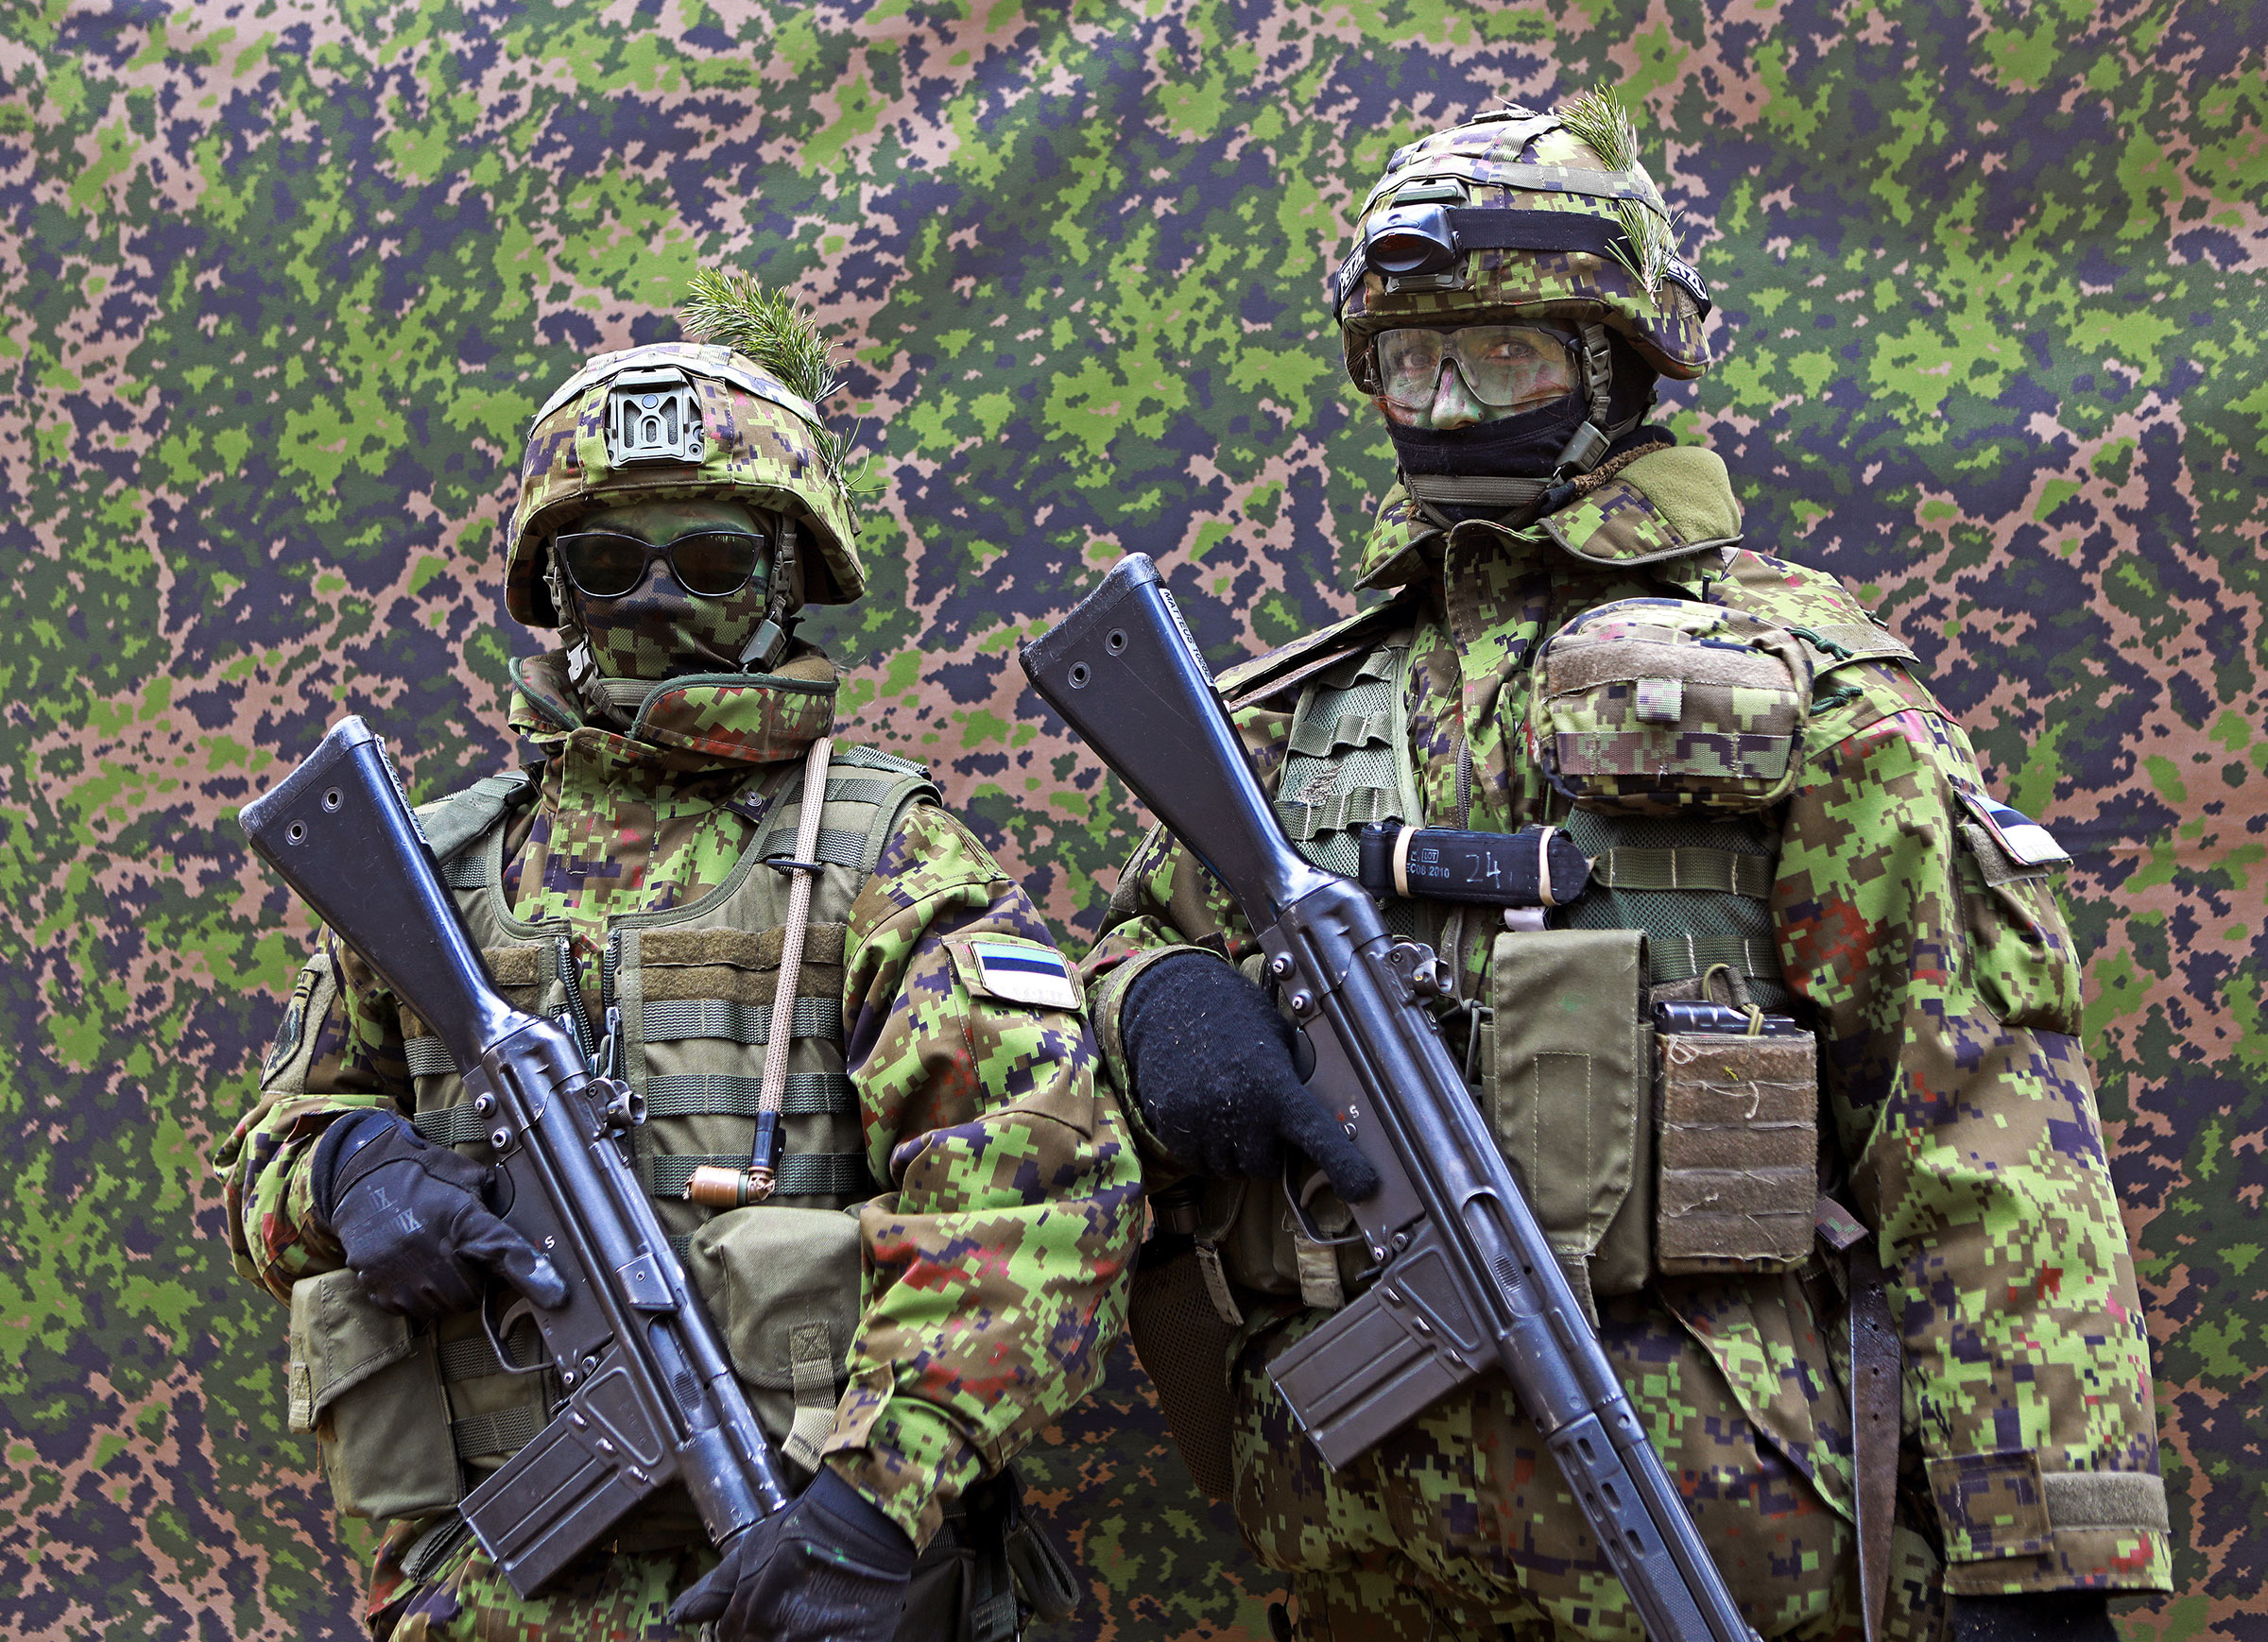 The Ordinary Civilians in Estonia Preparing to Protect Their Country Against Putin